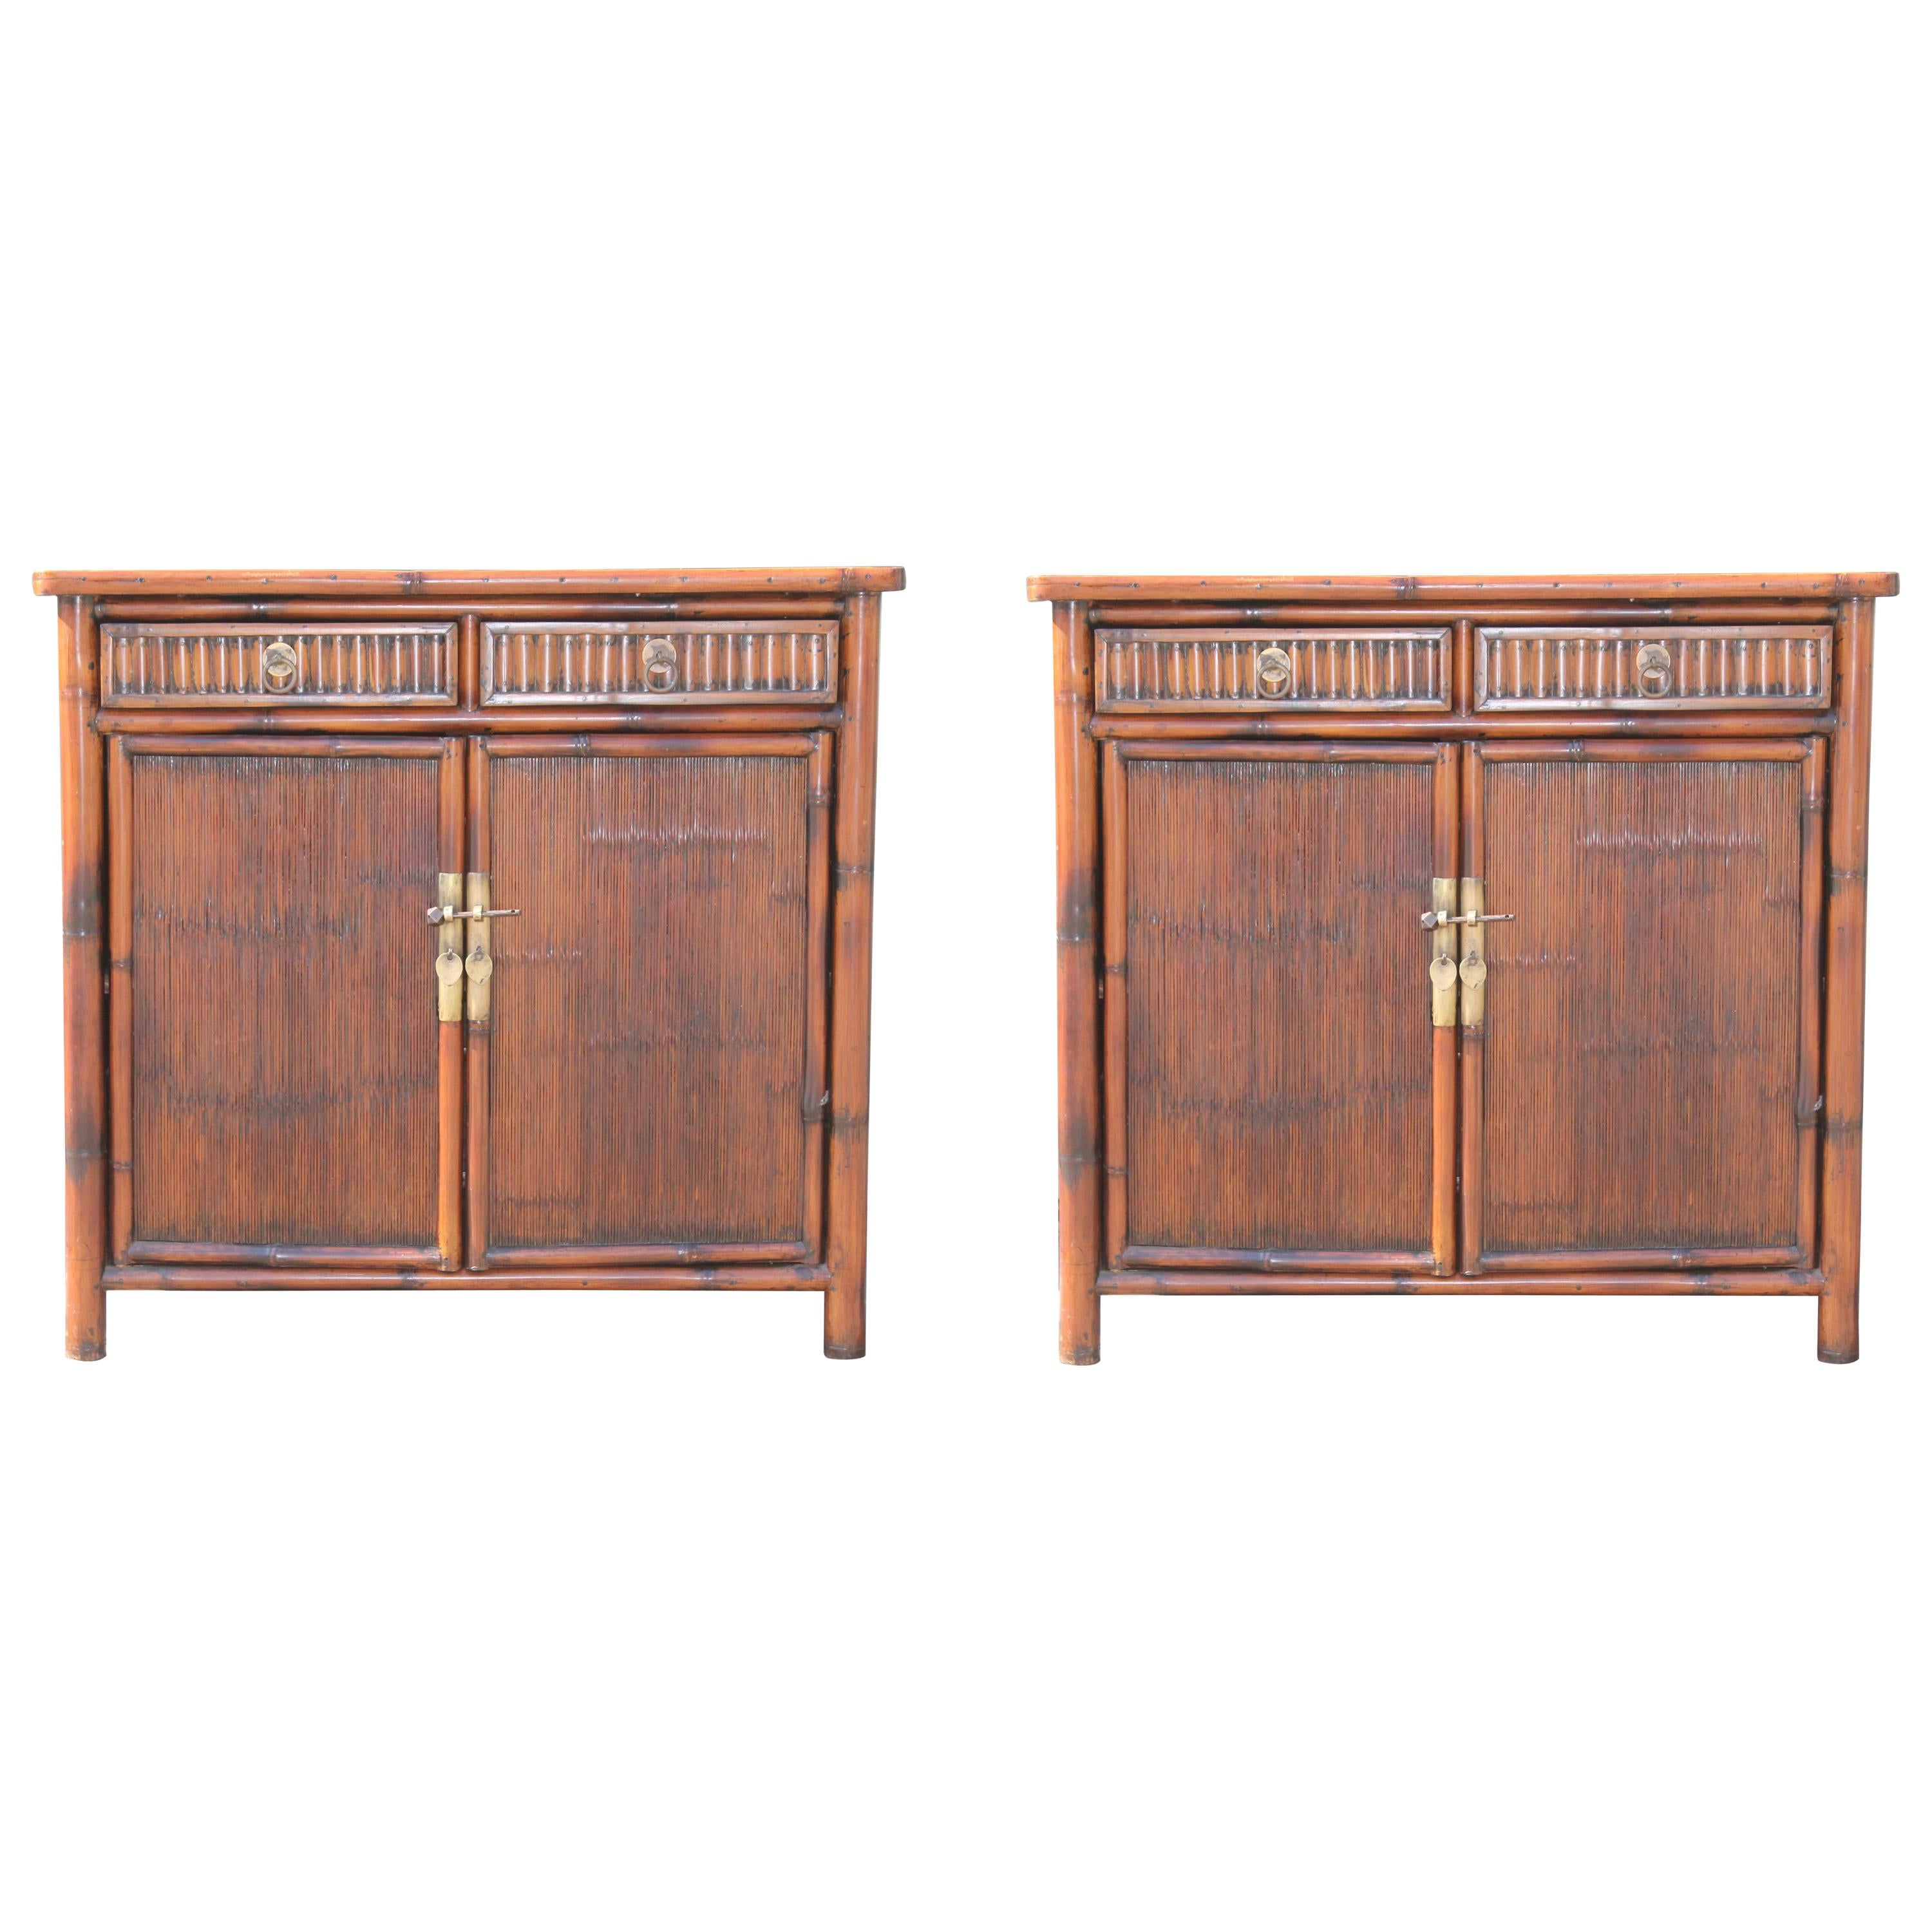 Pair of Bamboo Side Tables / Cabinets